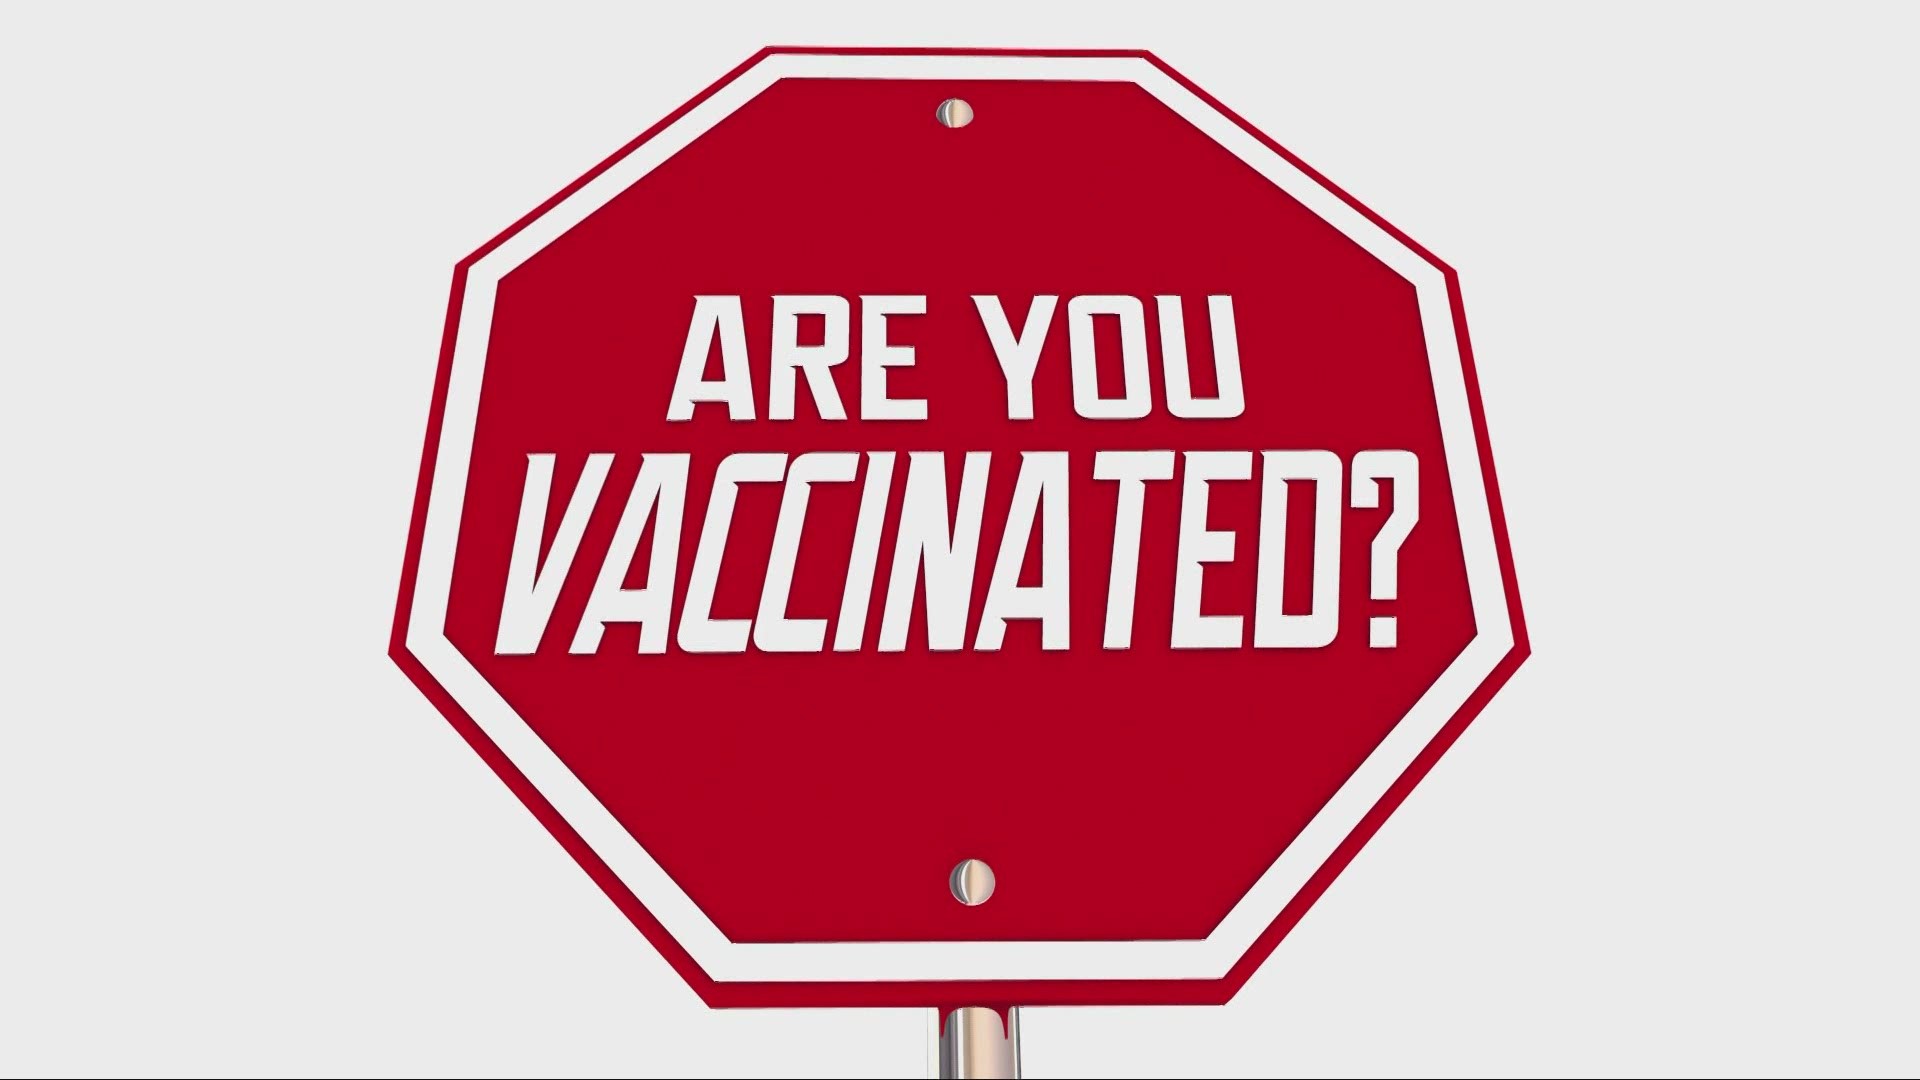 It's a problem that's been going on a lot longer than the pandemic. Rachel Polansky reports on why some parent chose not the vaccinate their children.